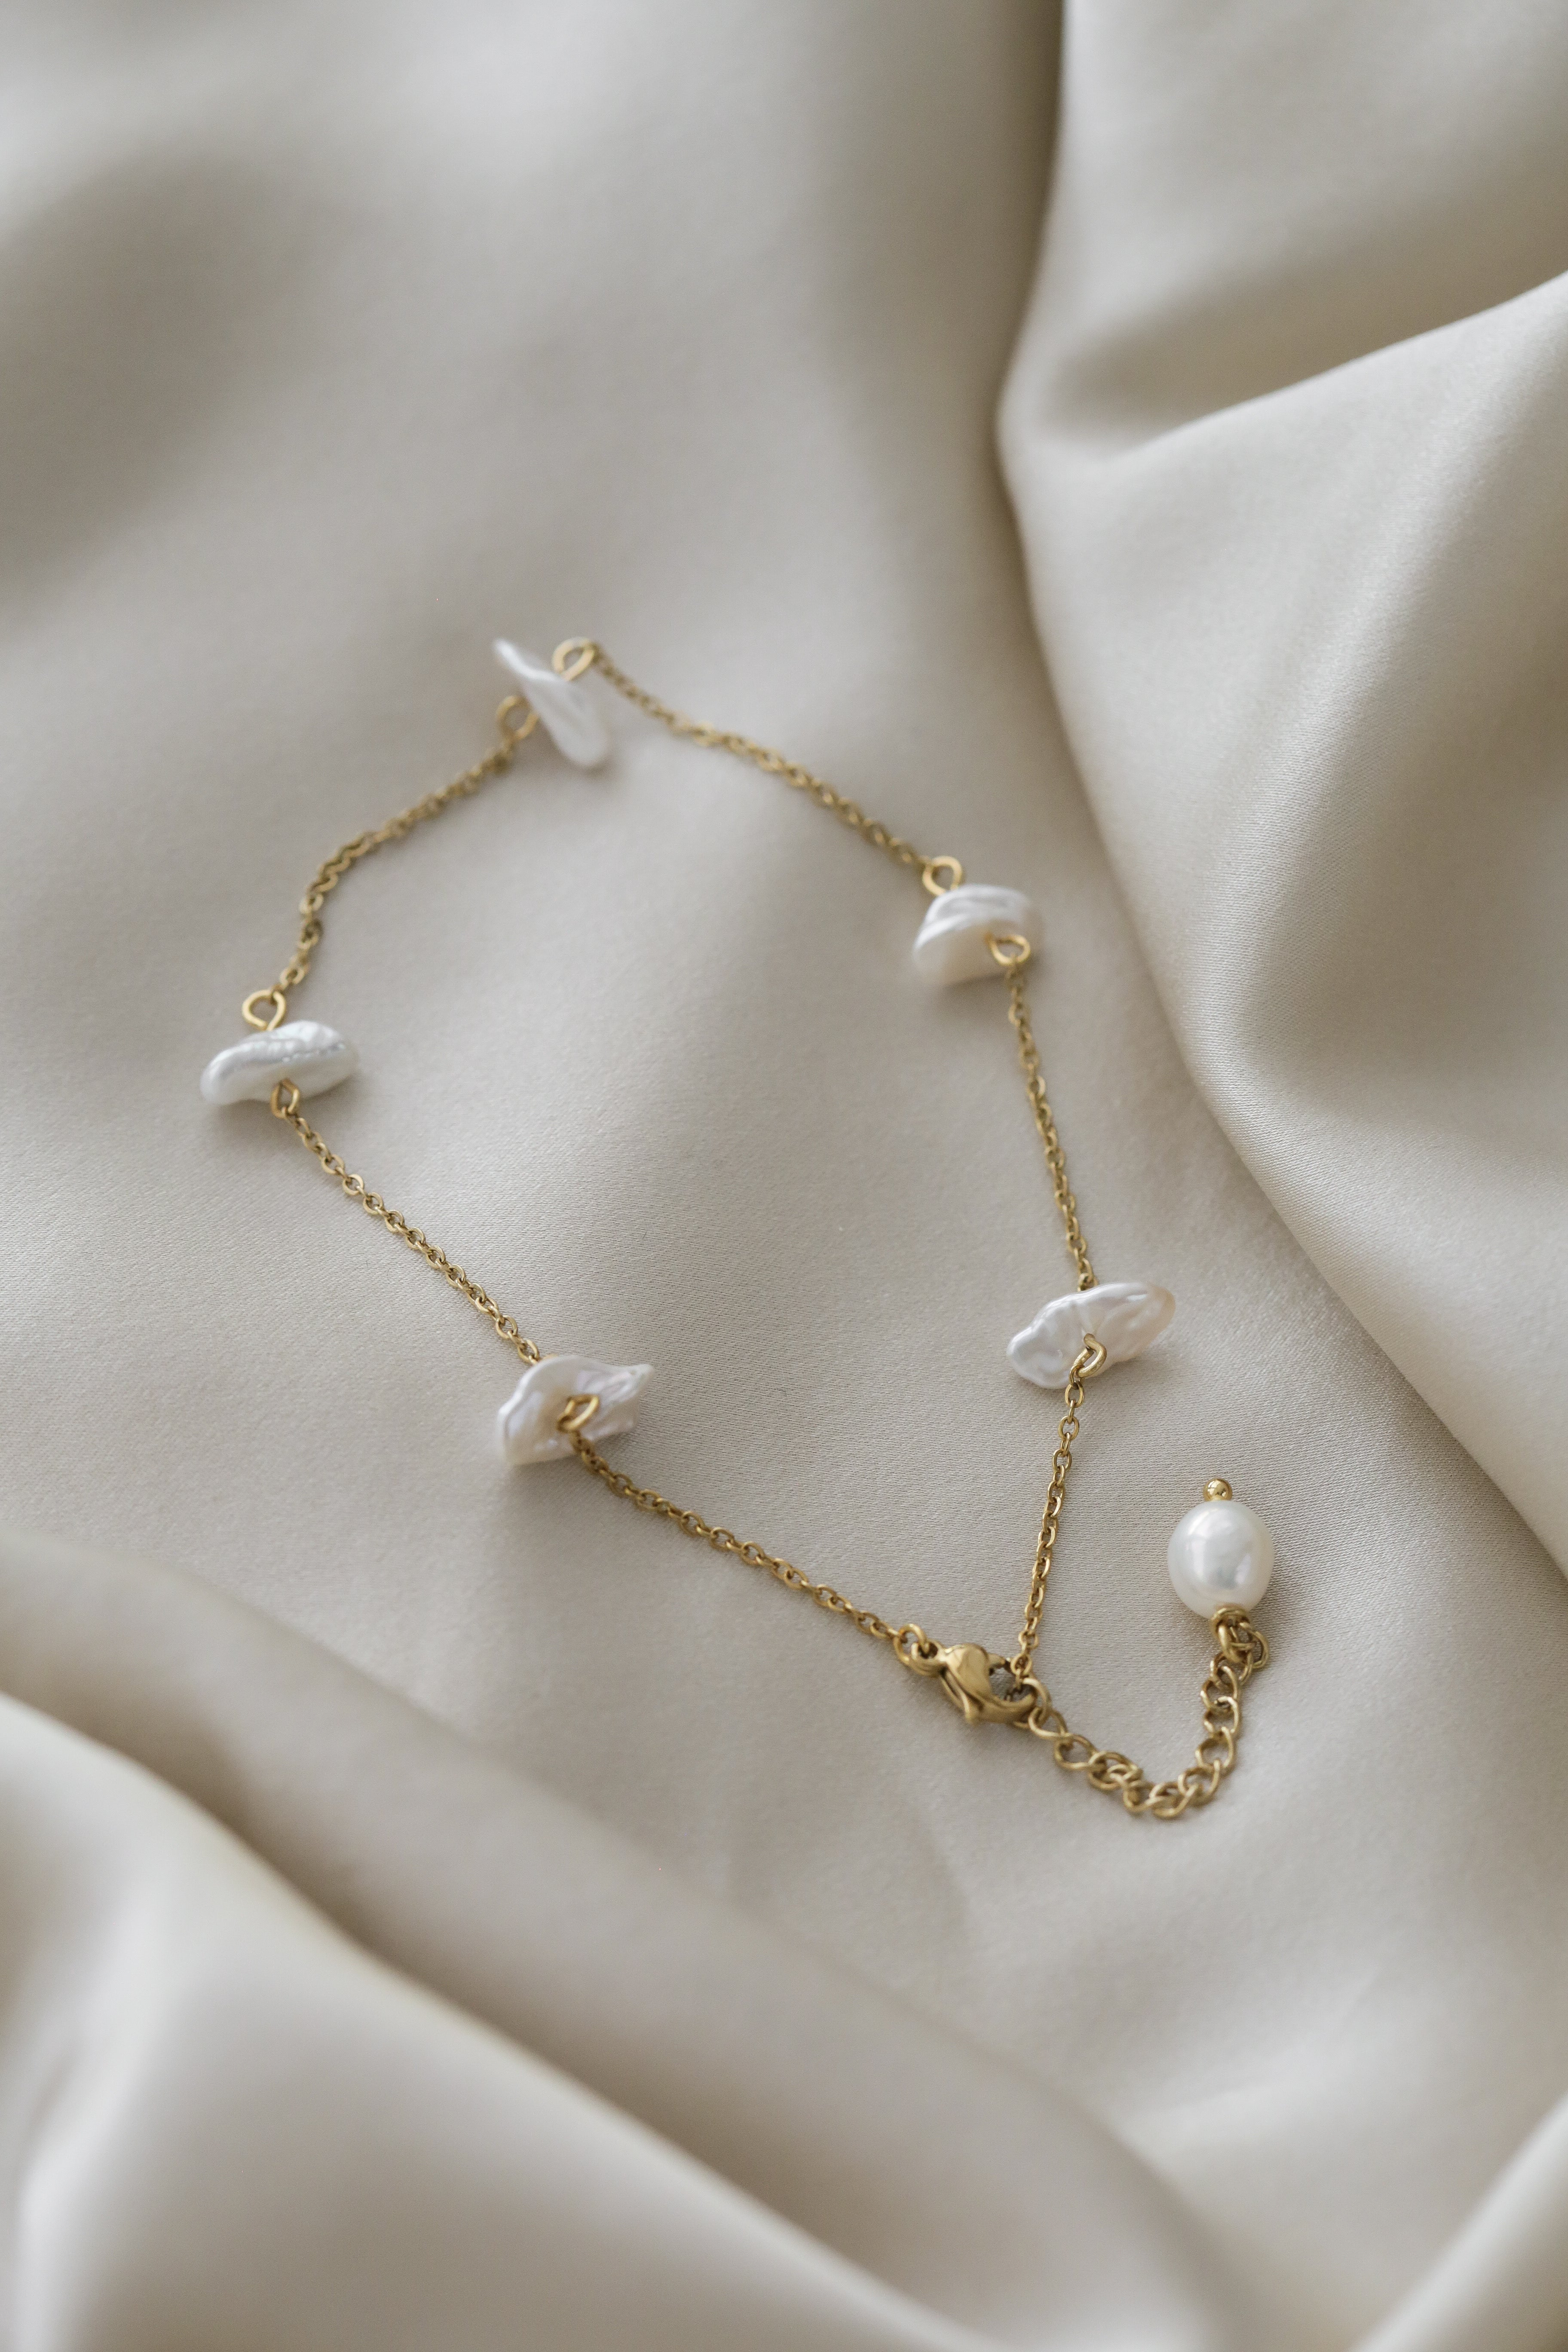 Xandy Anklet - Boutique Minimaliste has waterproof, durable, elegant and vintage inspired jewelry